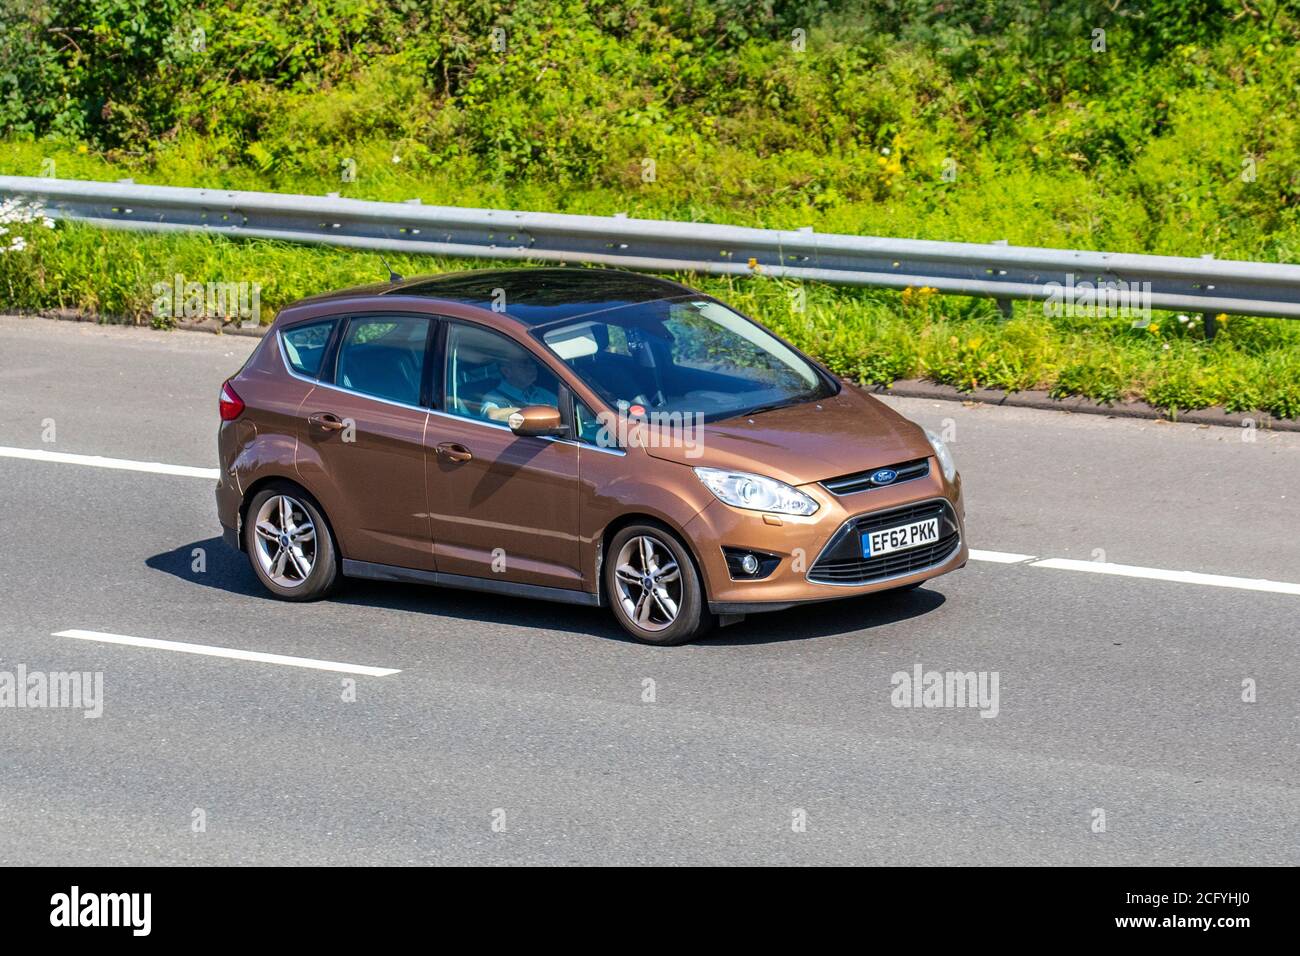 2012 brown Ford C-Max Titanium X TDCI; Vehicular traffic moving vehicles, cars driving vehicle on UK roads, motors, motoring on the M6 motorway highway network. Stock Photo